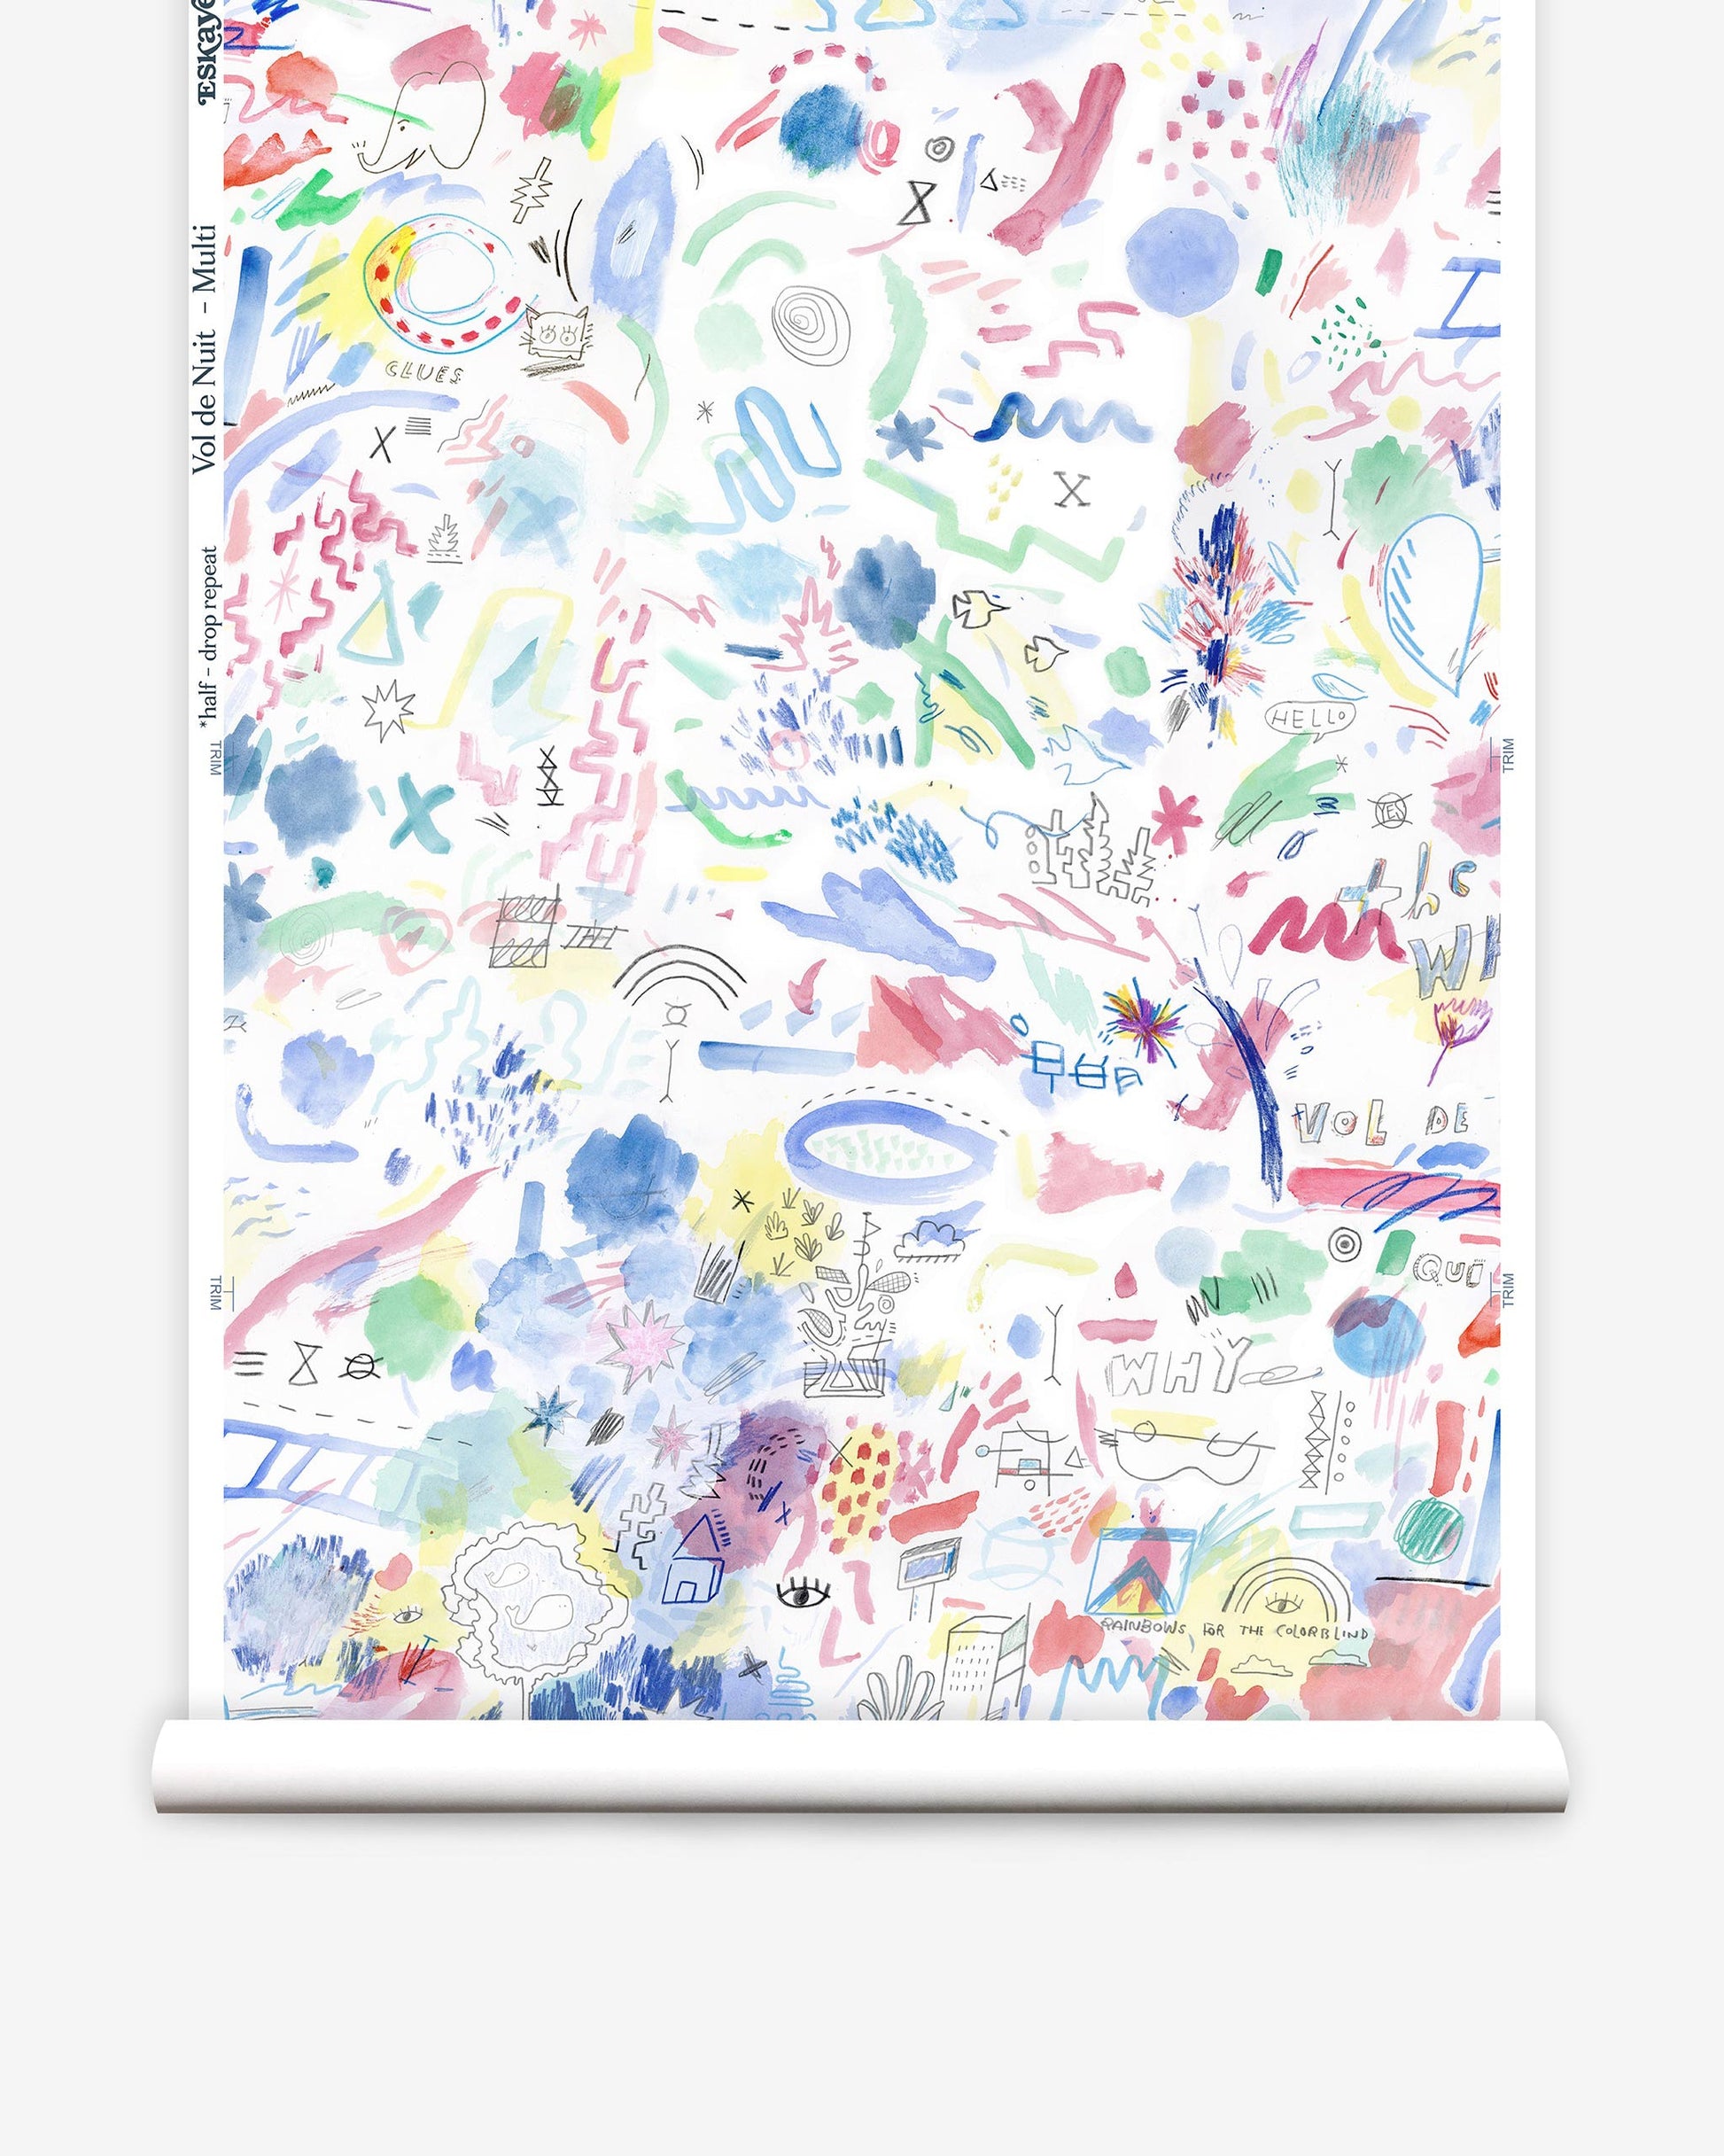 A roll of Vol de Nuit Wallpaper Multi with collaboration drawings on it